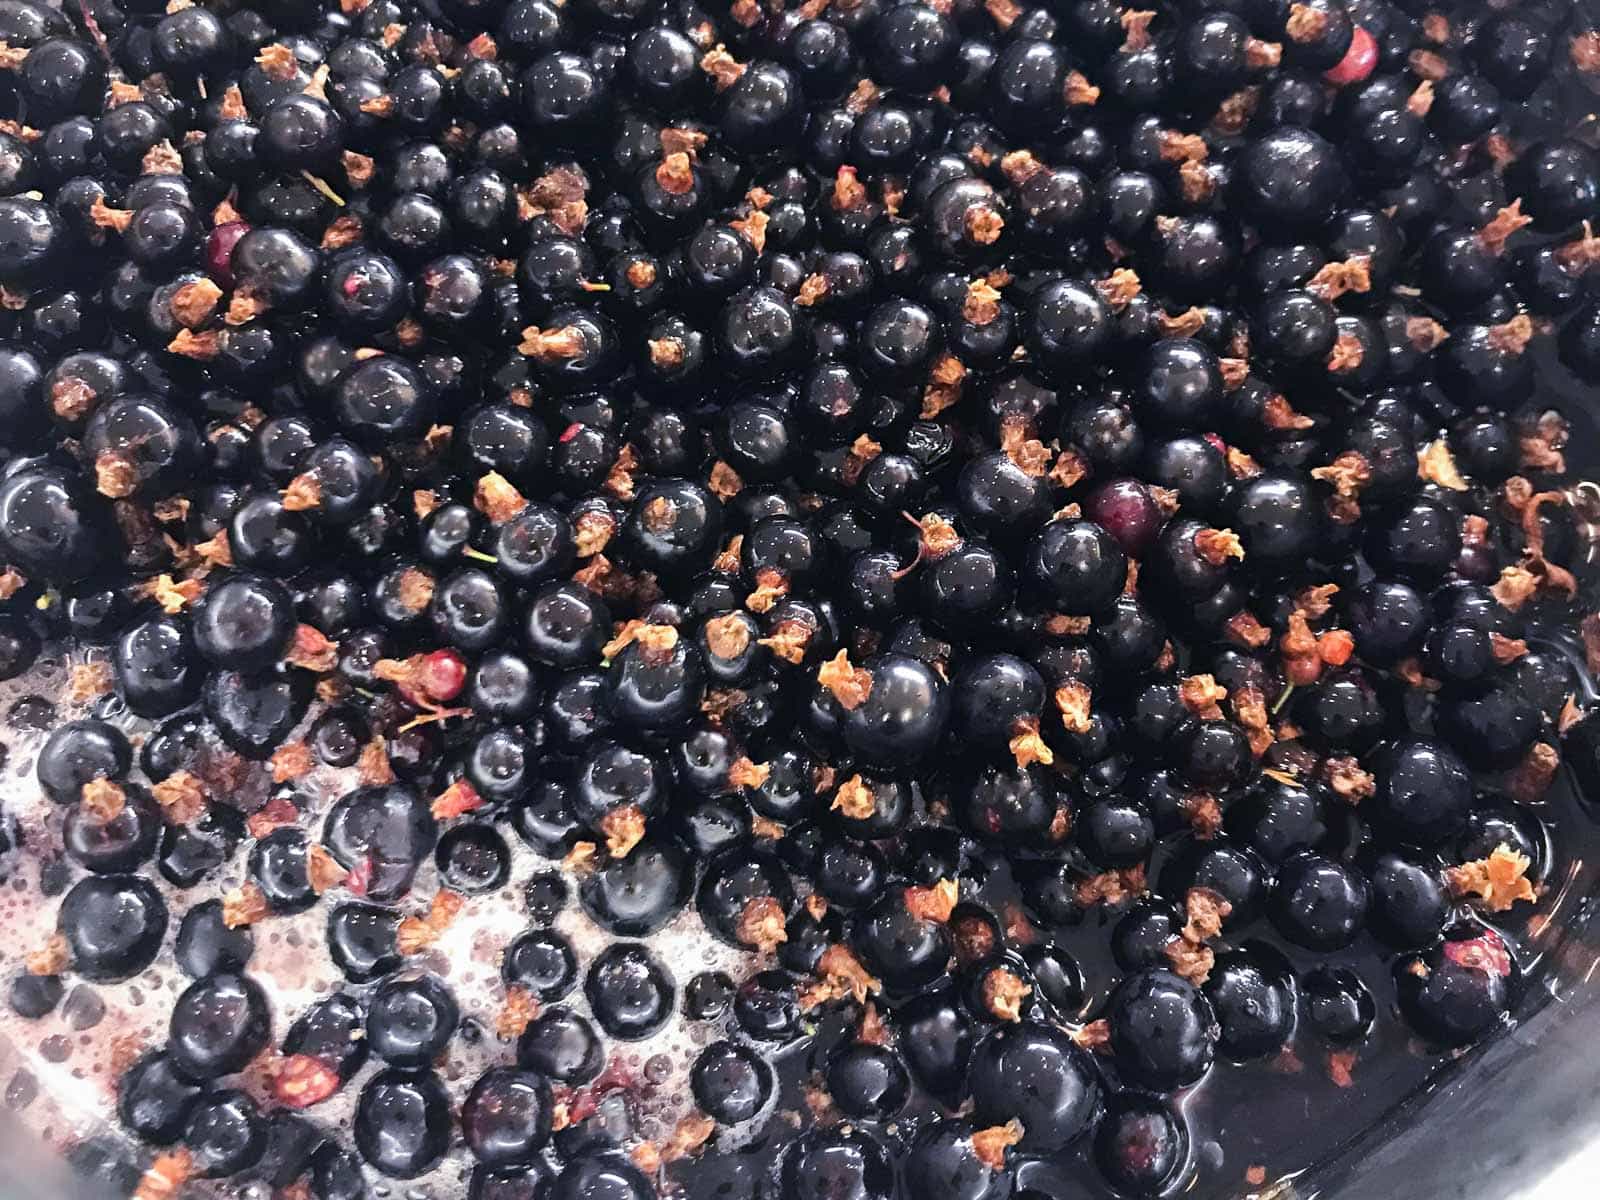 Fresh blackcurrants in a pan about to be made into a smooth jam / jelly.